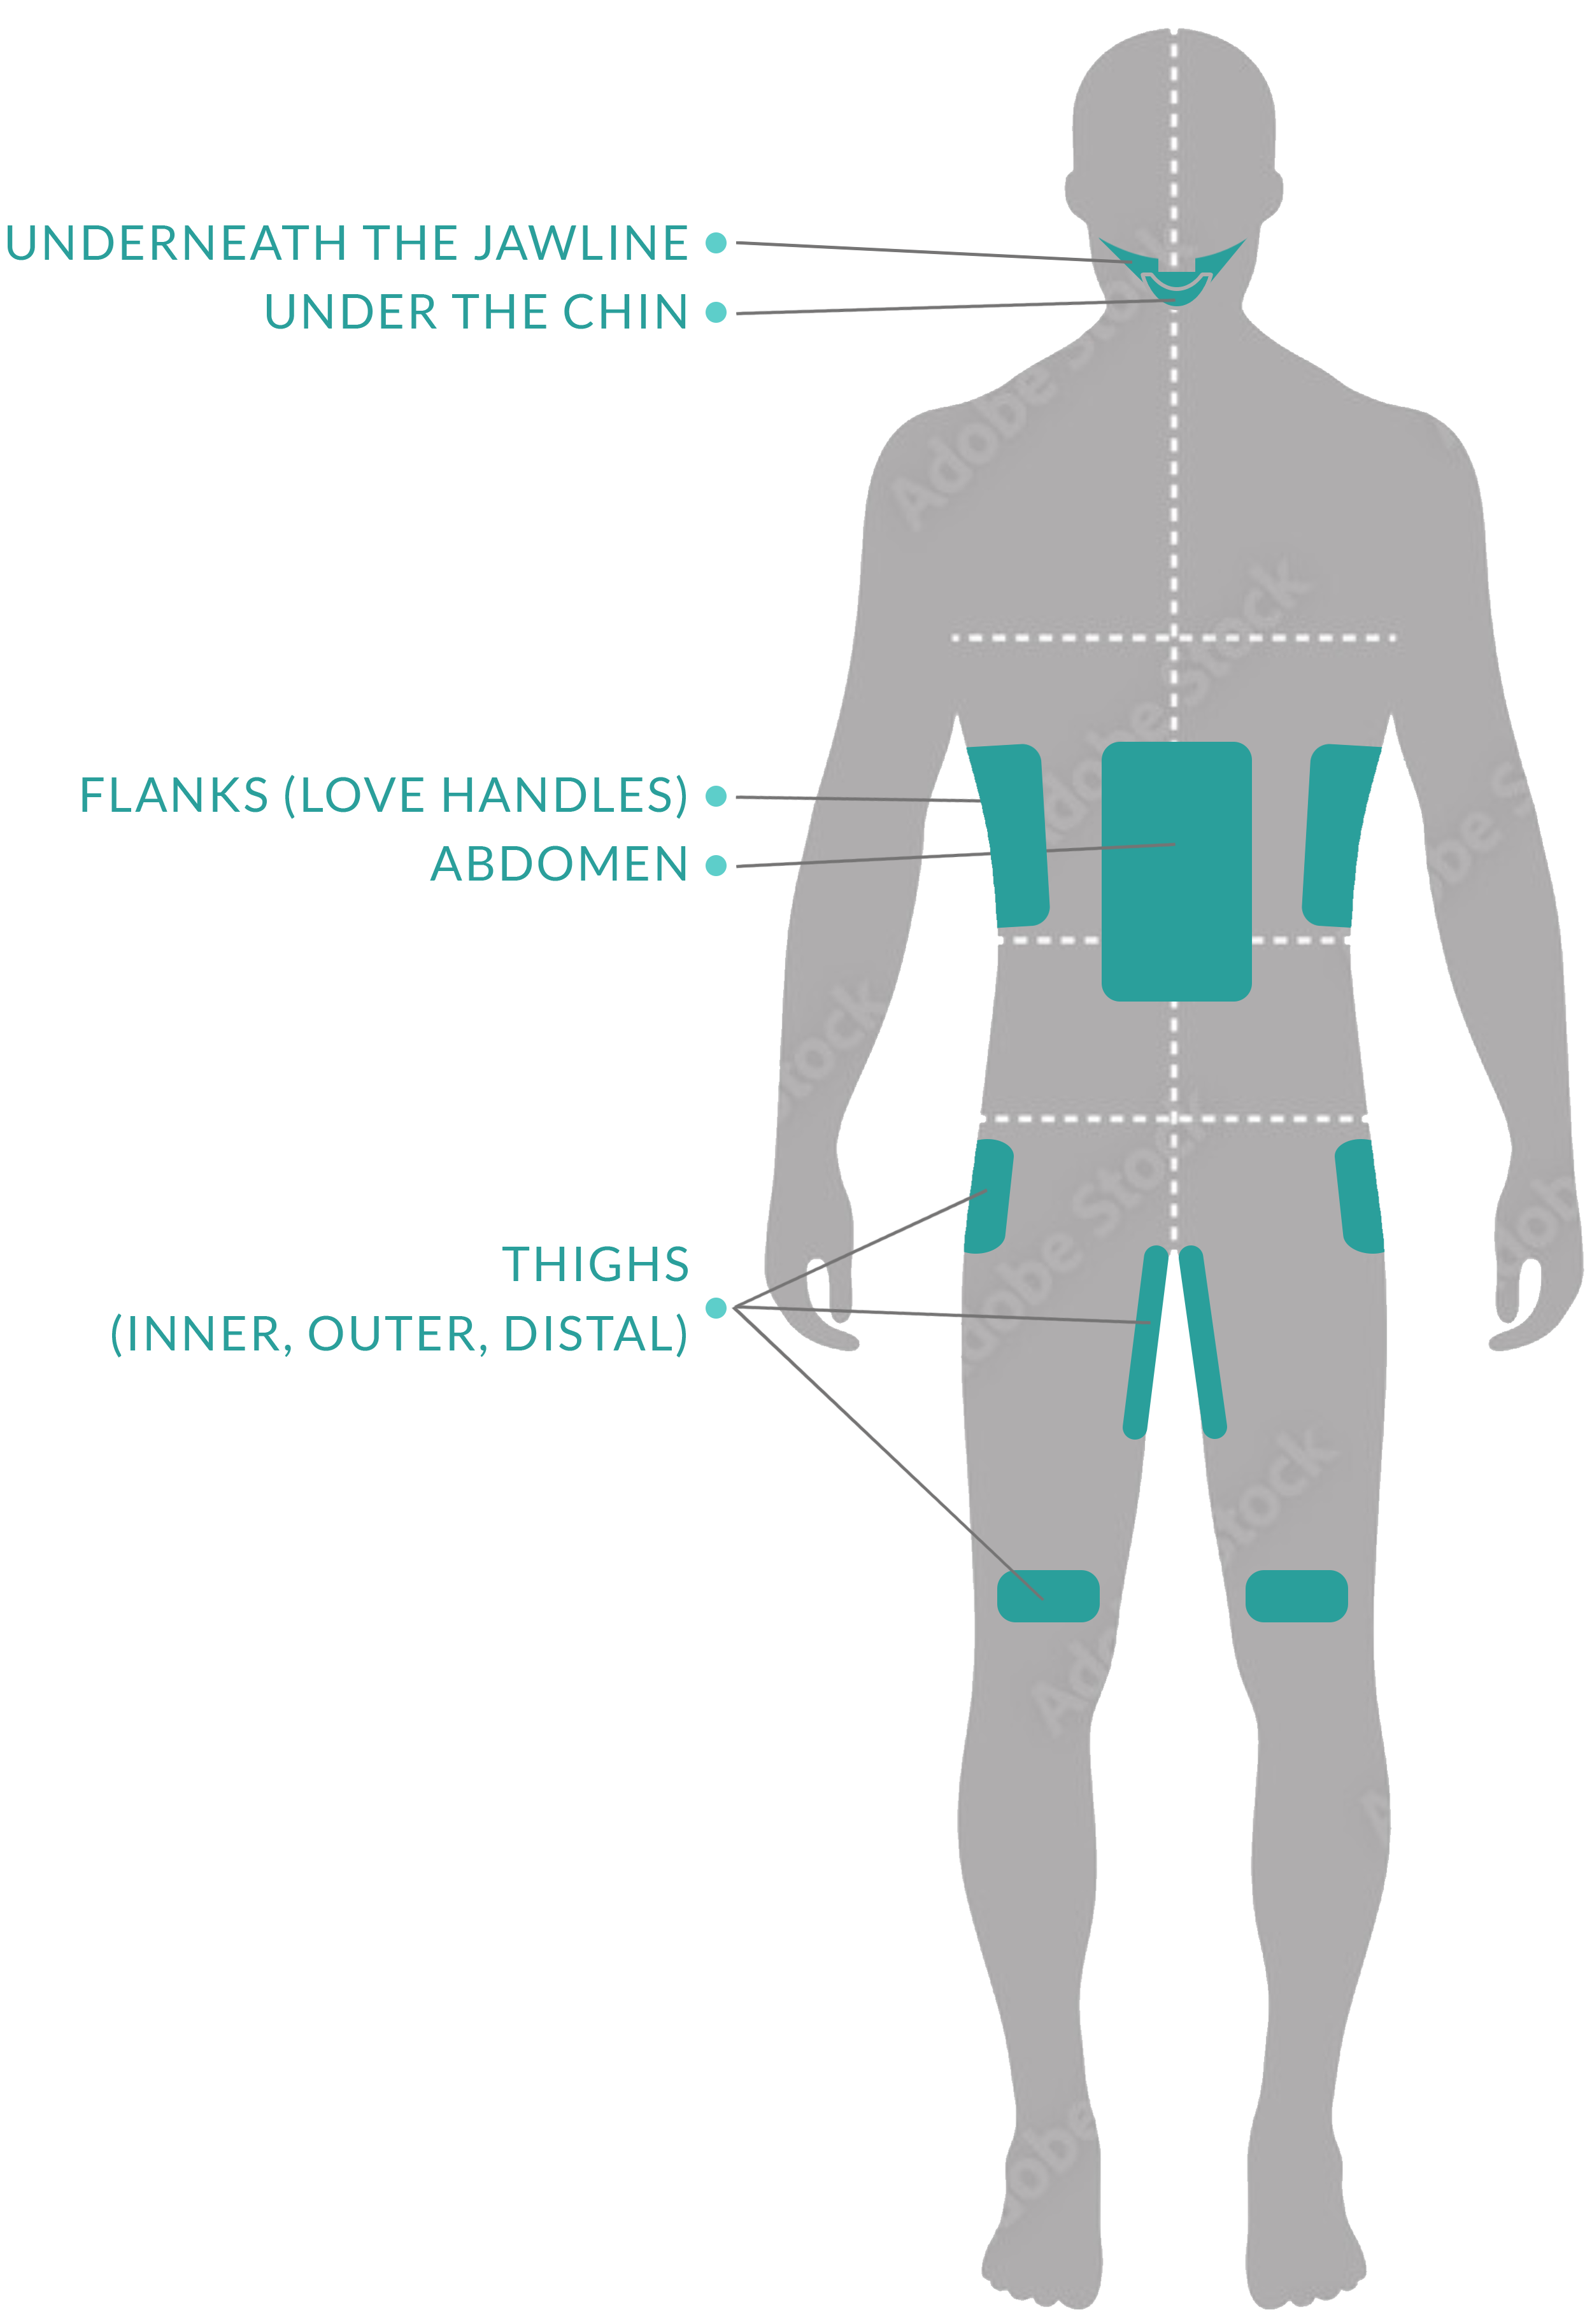 Diagram of male back showing body zones targeted by CoolSculpting: Under the Jawline, Under Chin, Flank (Love Handles), Abdomen, Inner Thighs, Outer Thighs, and Distal Thighs